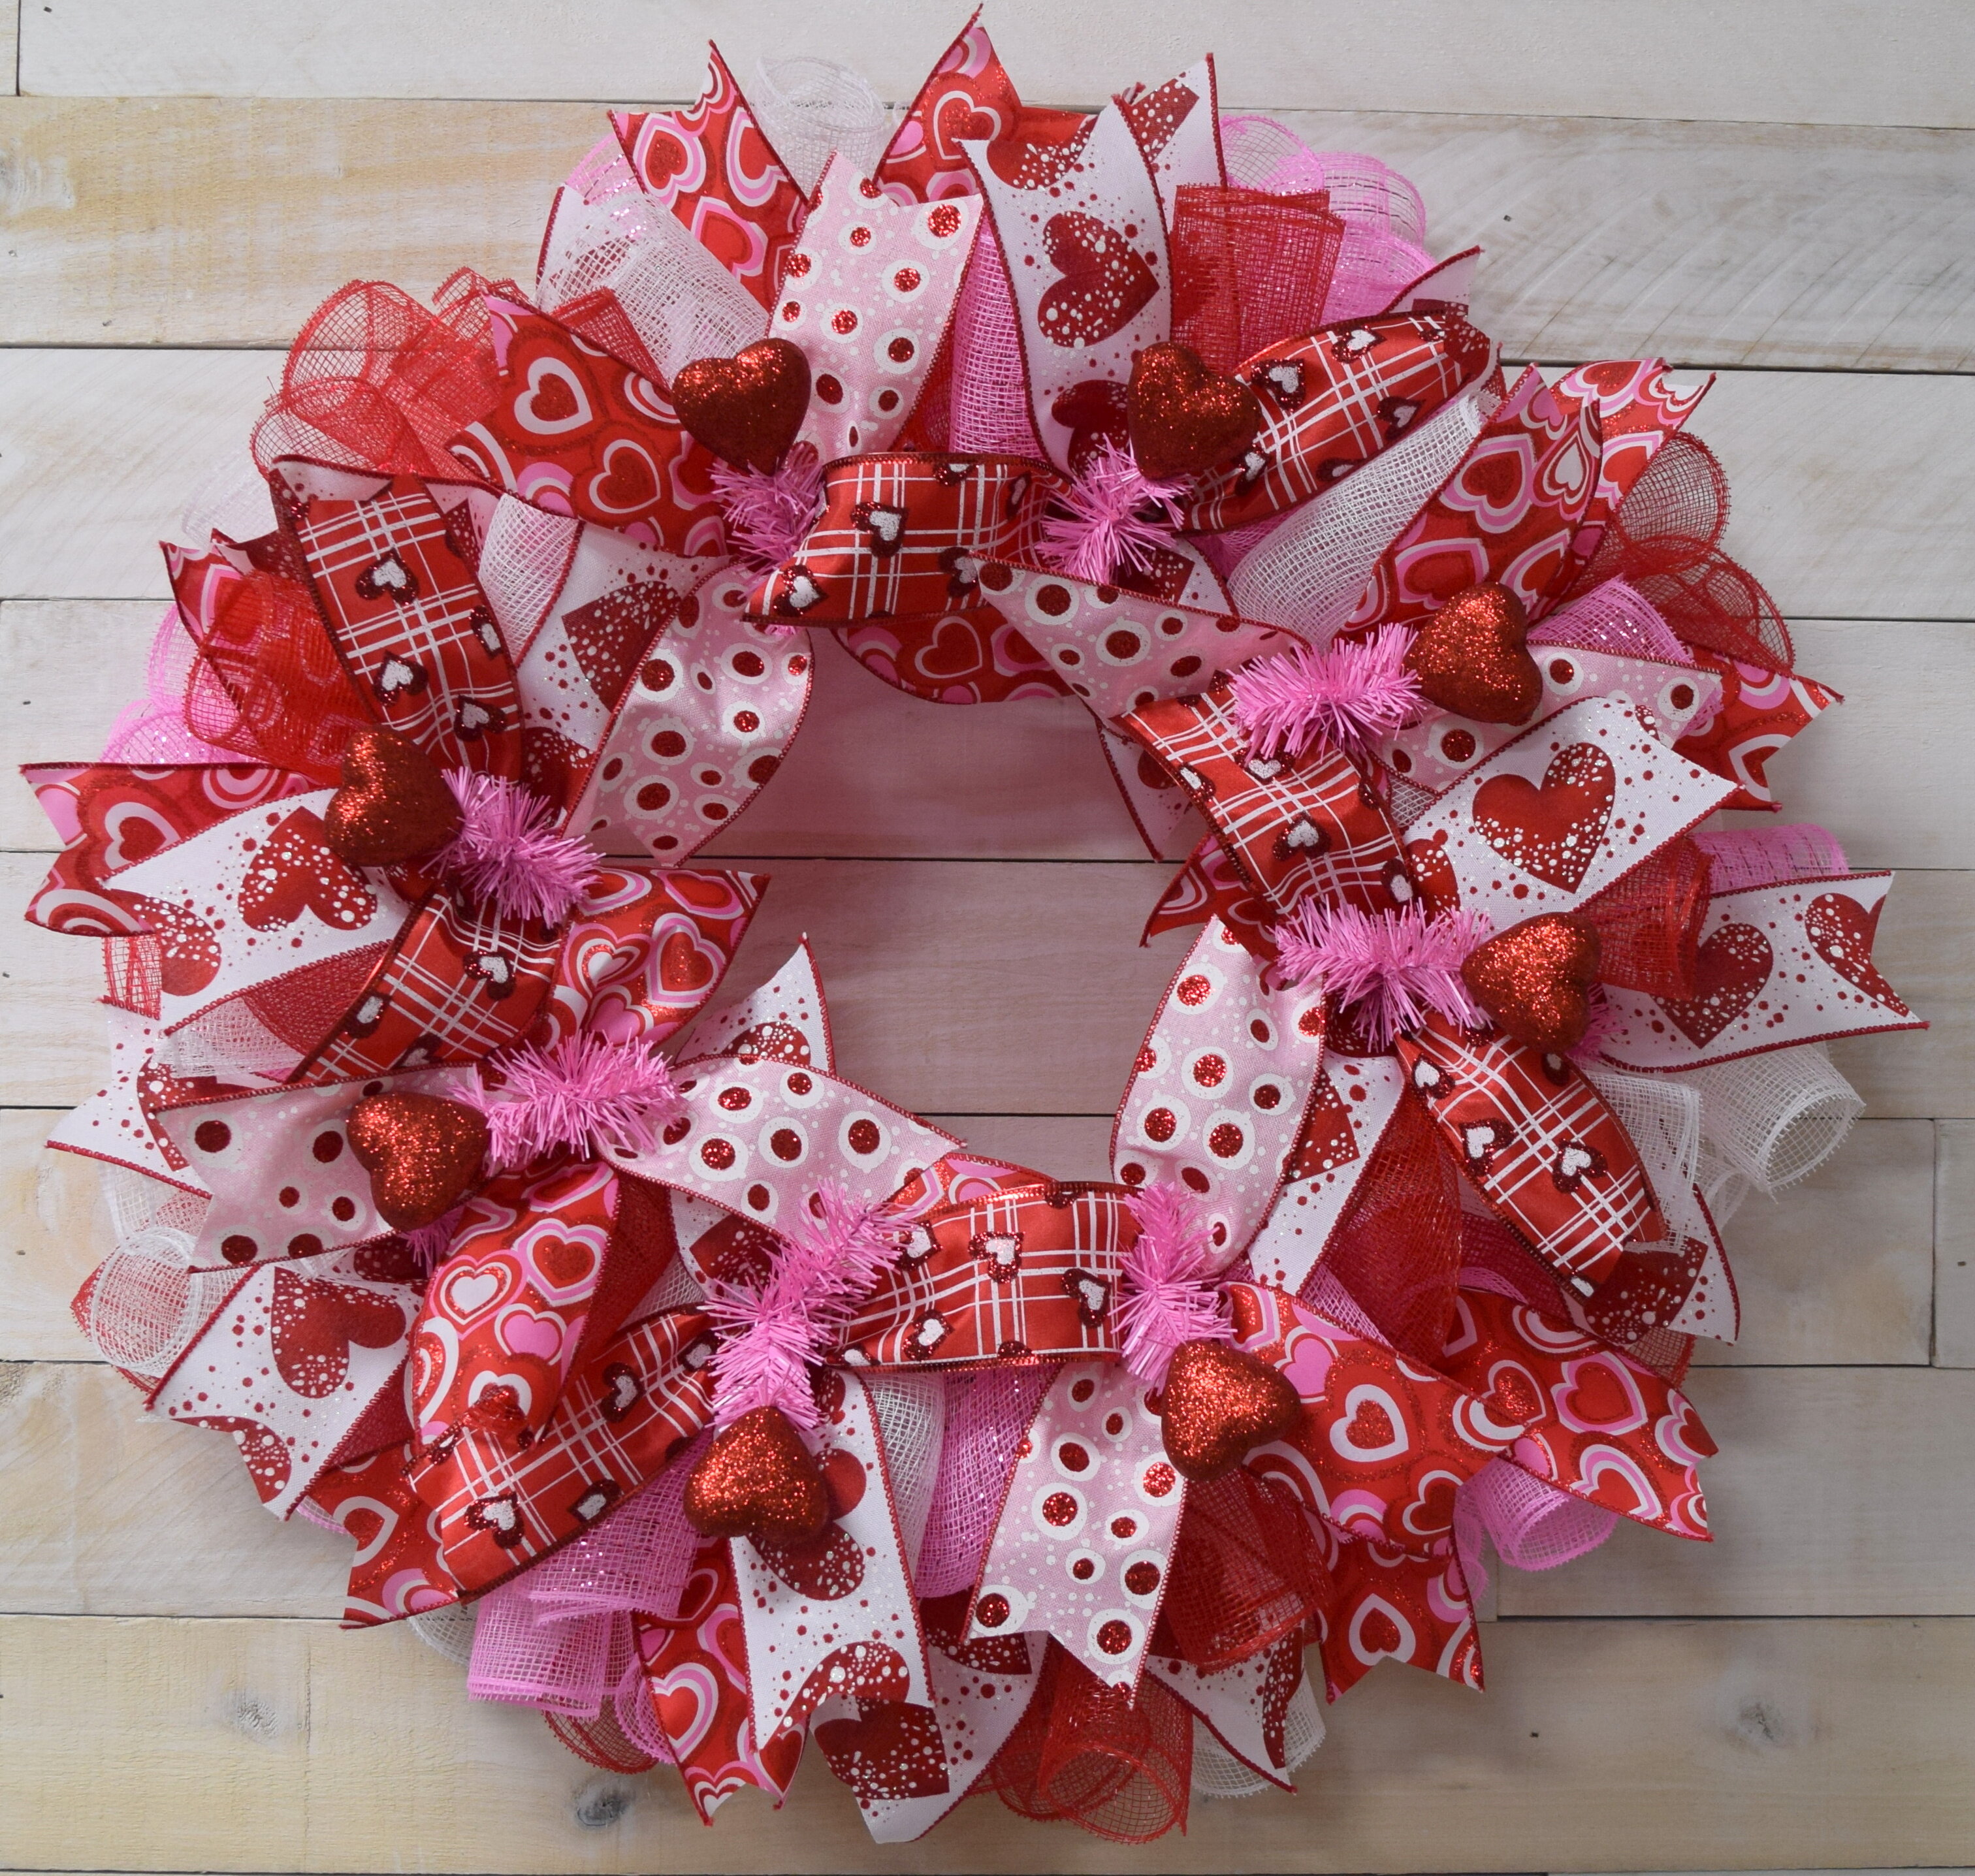 Valentines Wreaths 24 Fabric Mesh - She Shed Home Decor